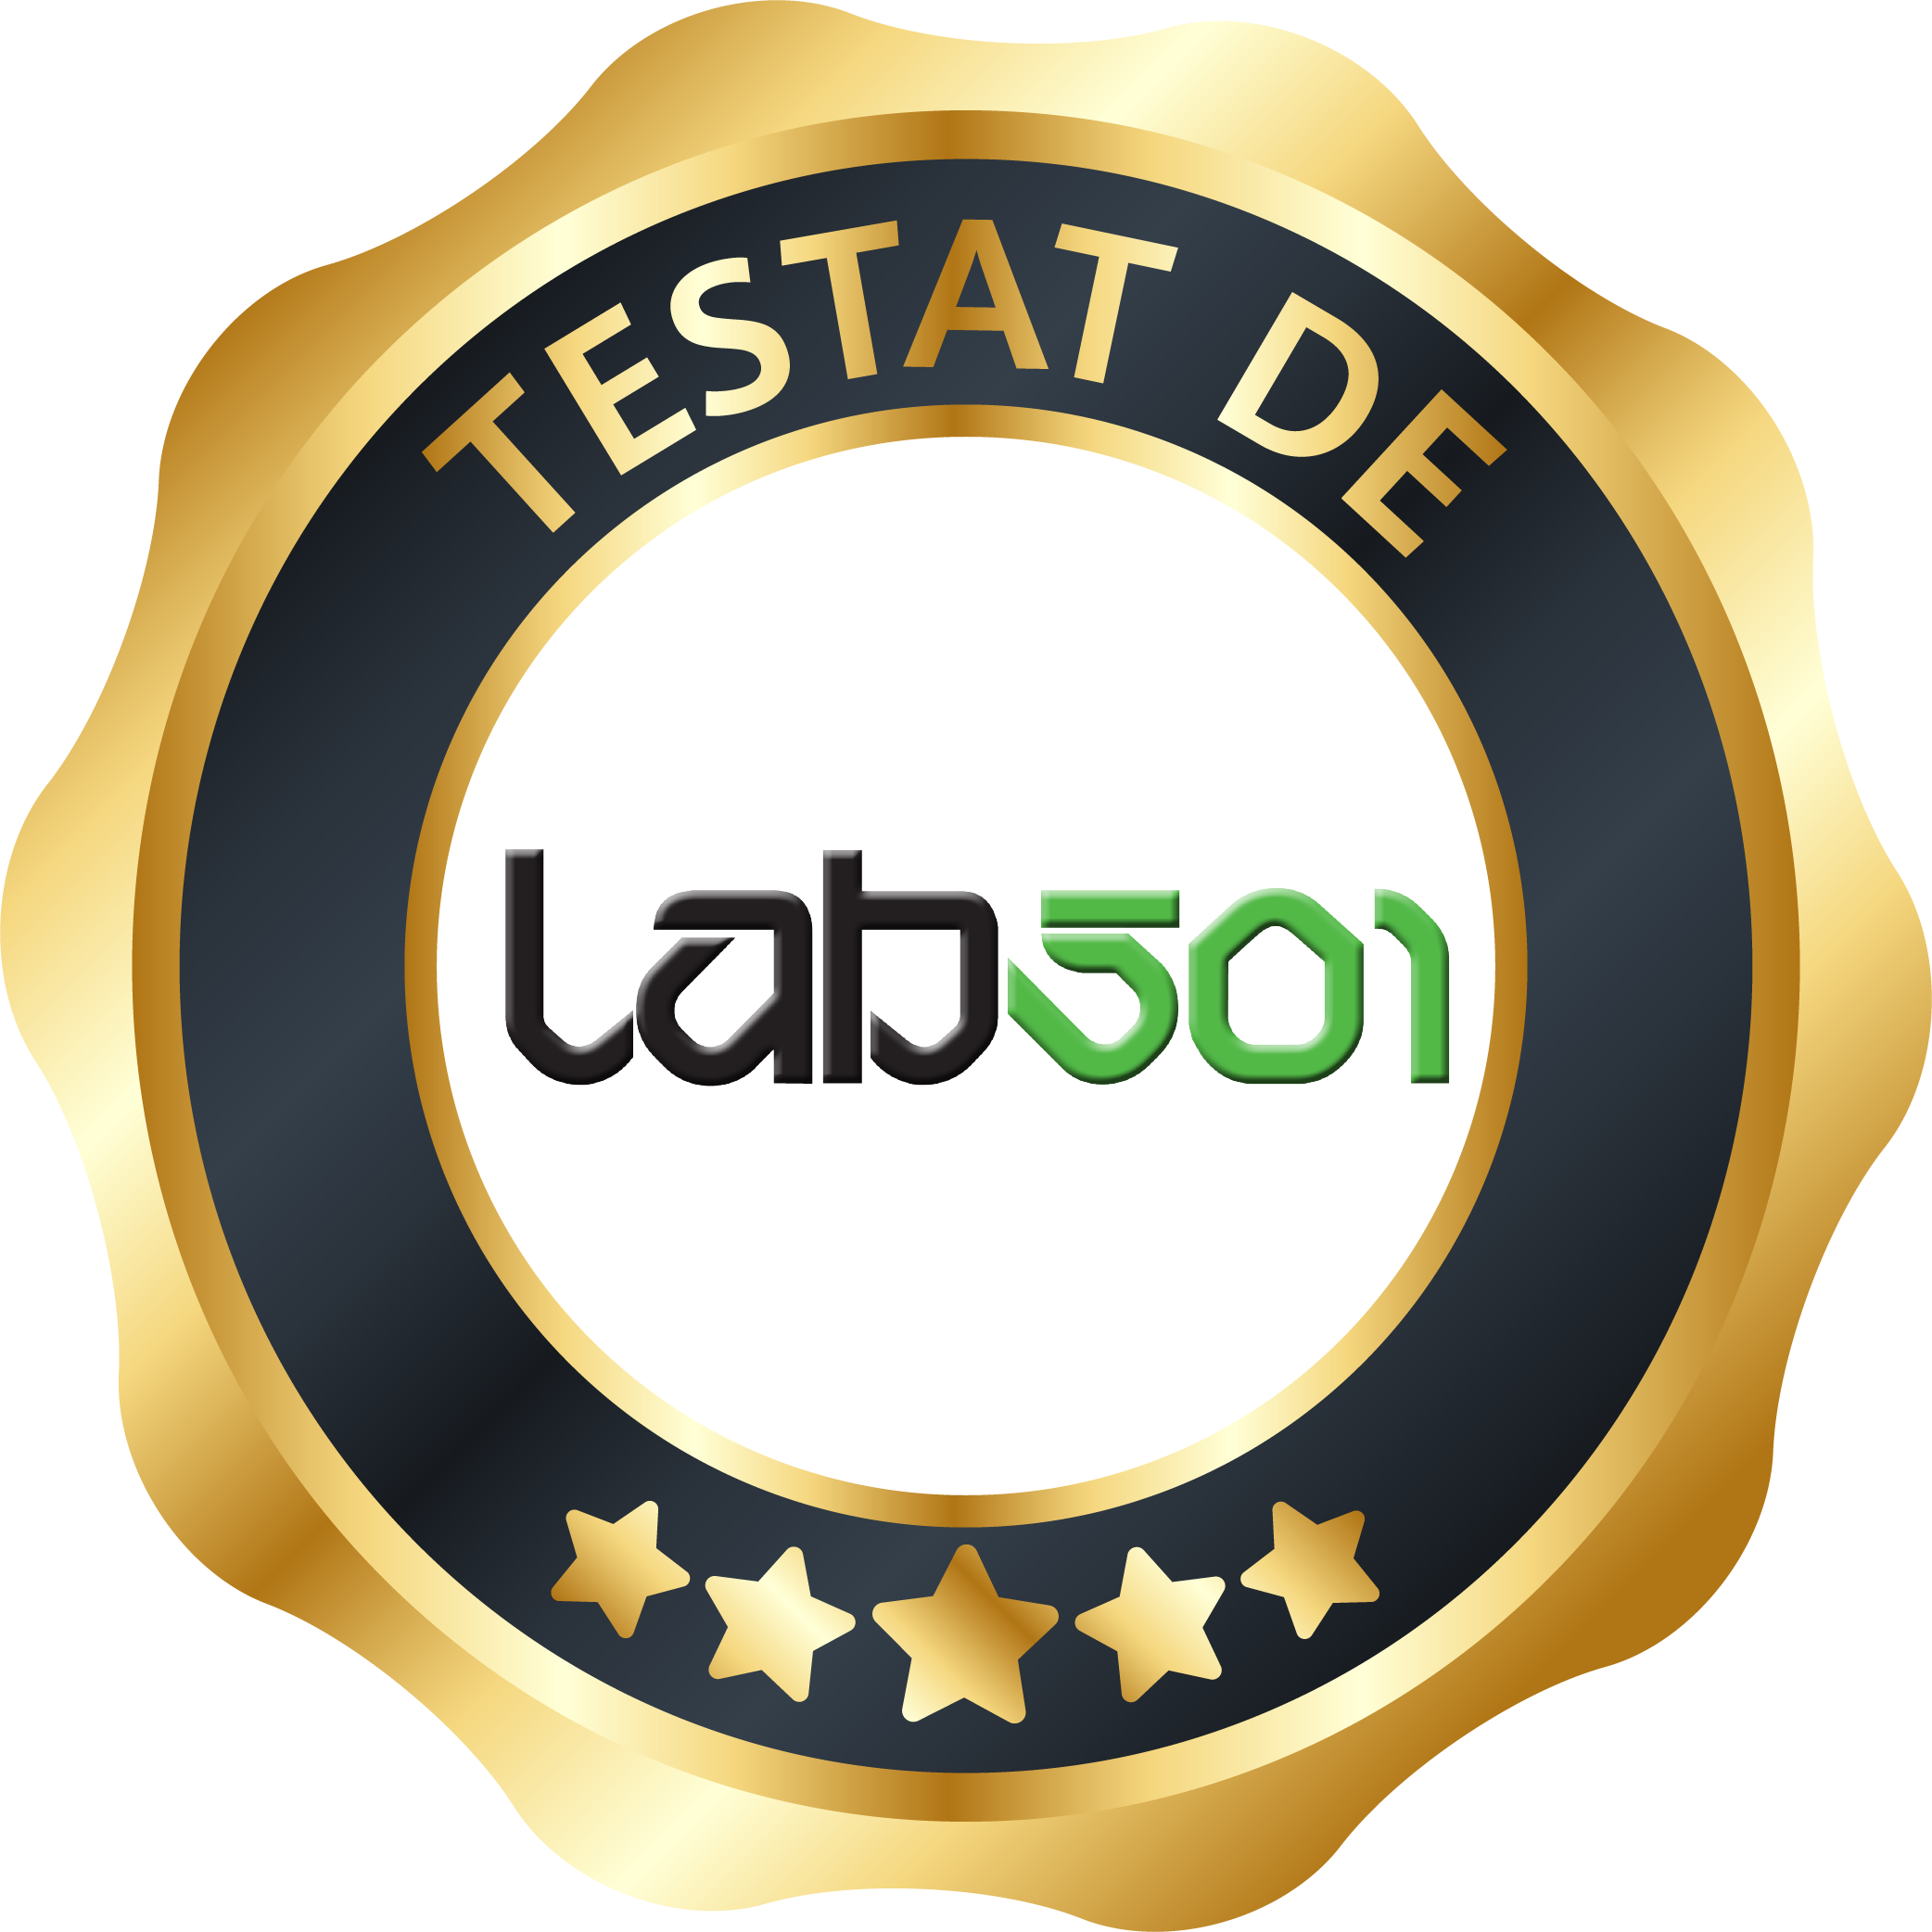 Lab501 Tested by Lab501